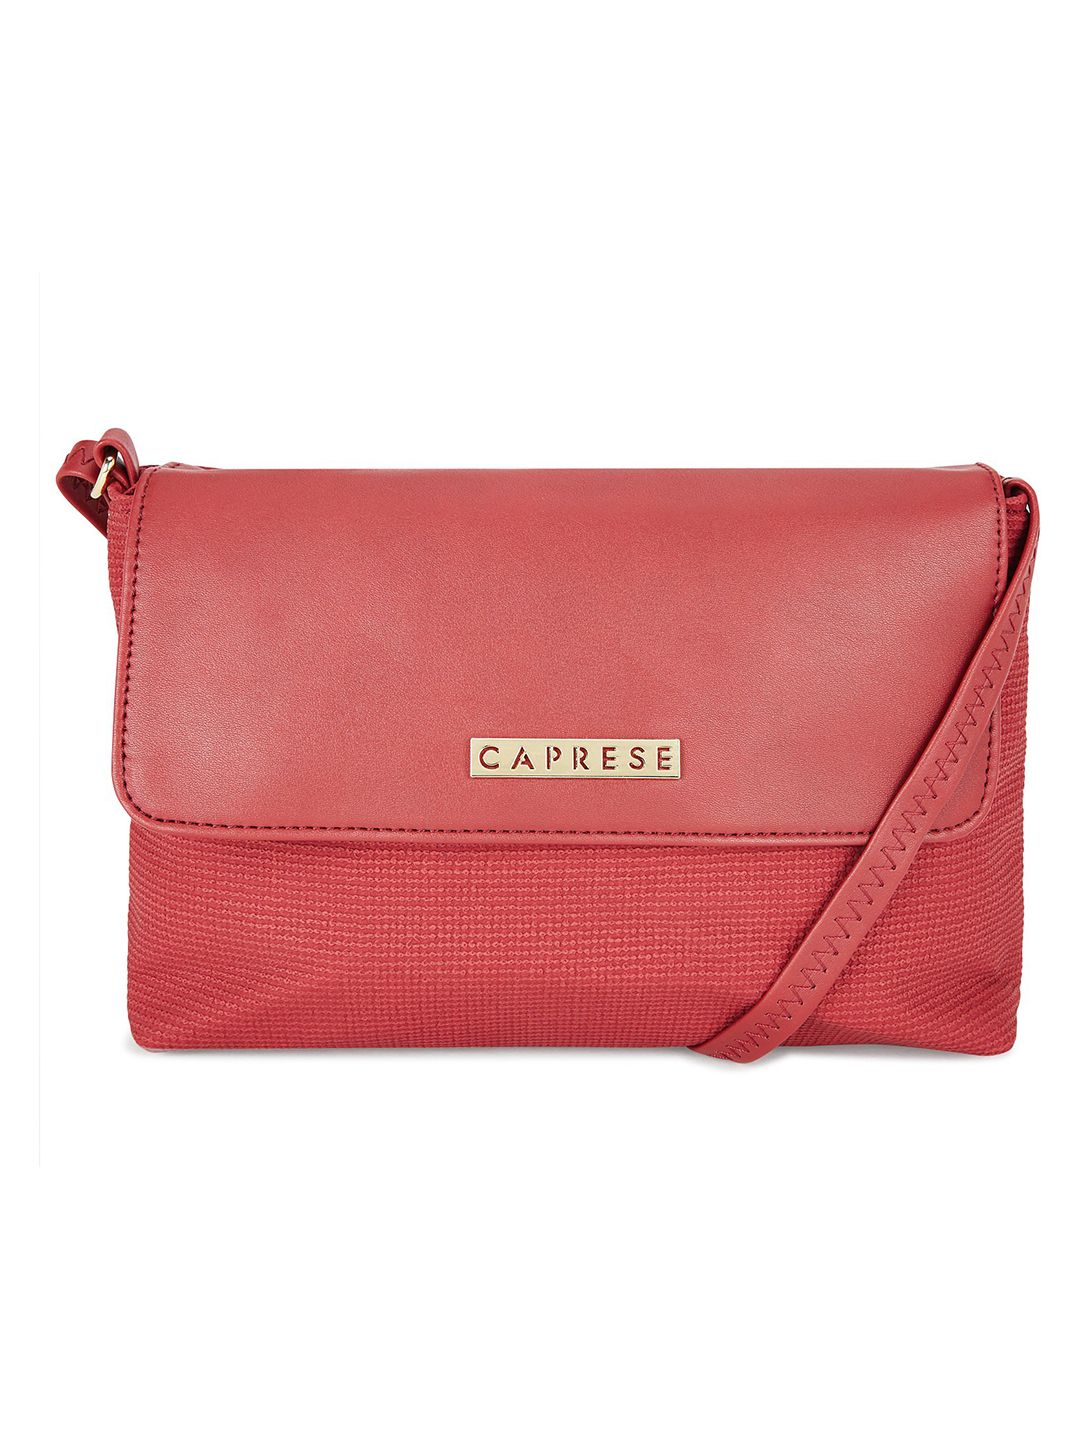 Caprese Red Textured Sling Bag Price in India